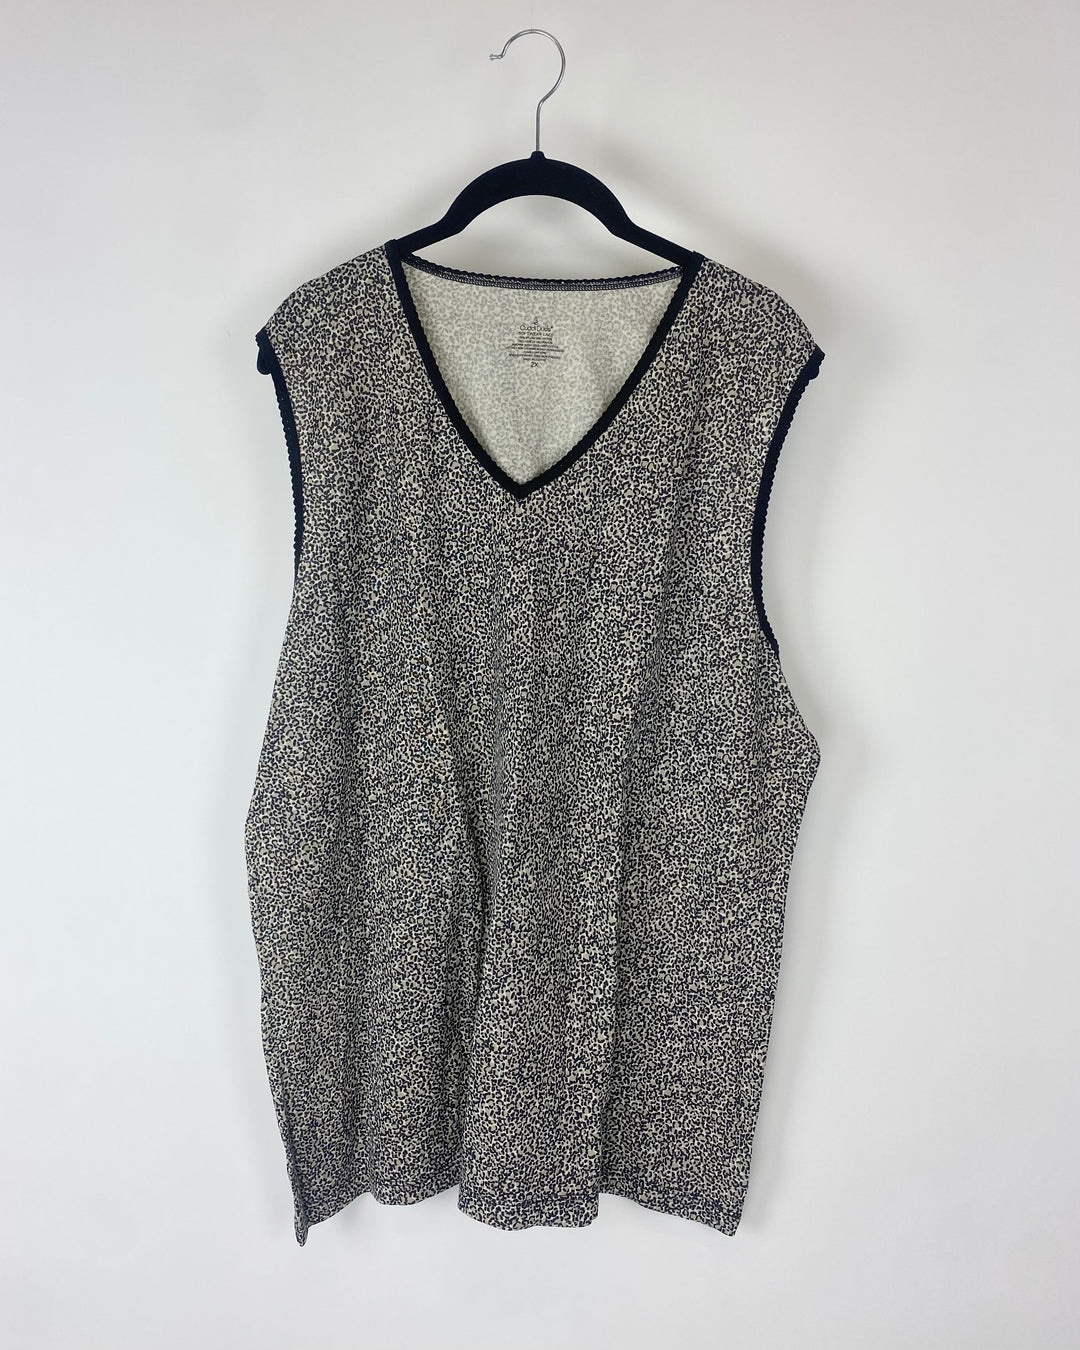 Cheetah V-Neck Lace Trimmed Tank - Size 1X